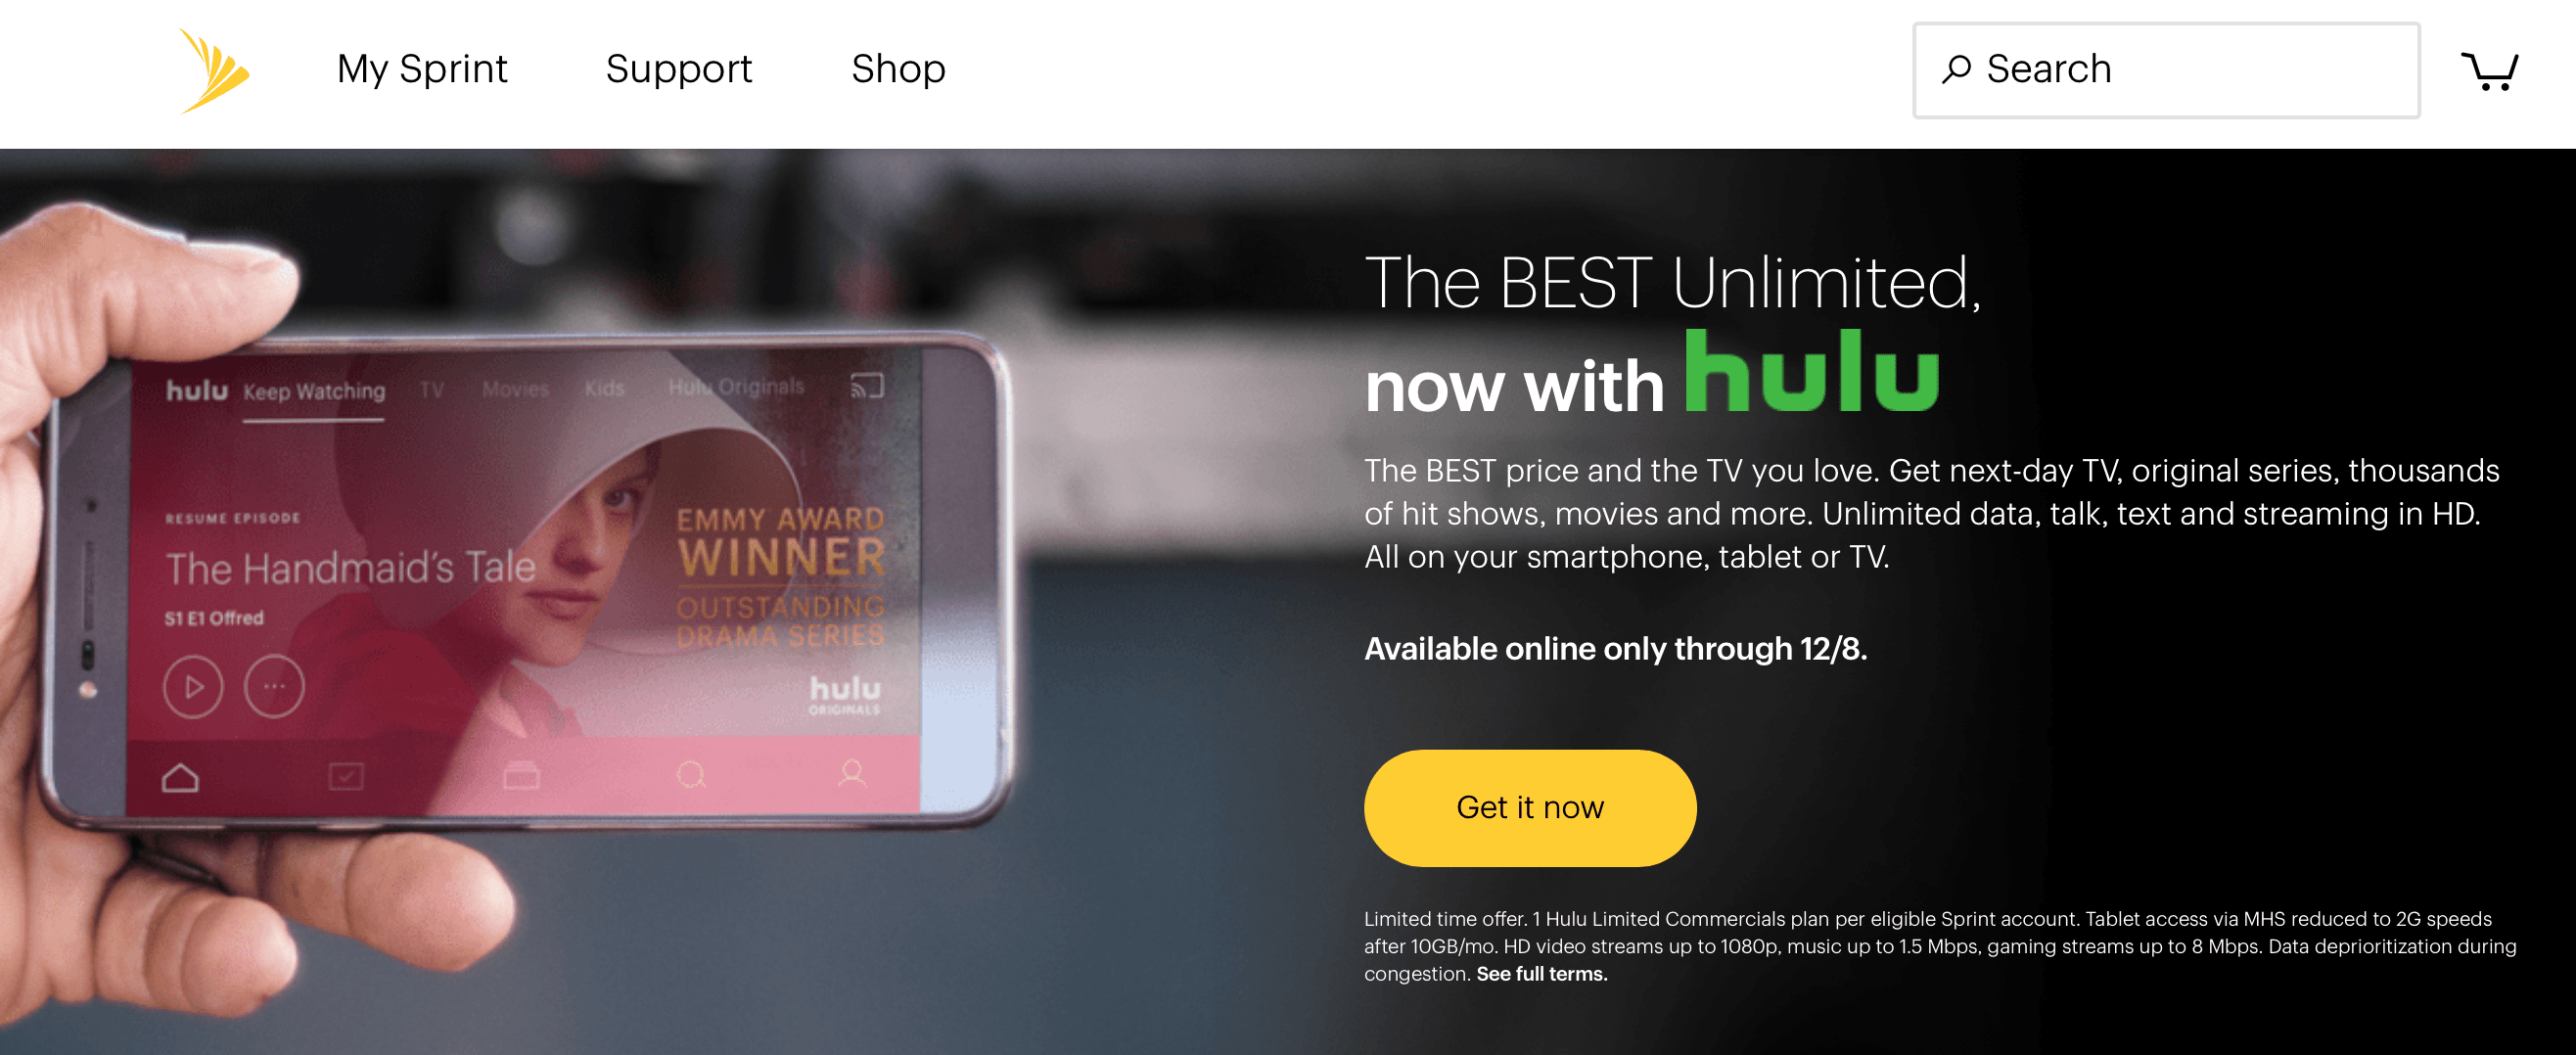 Sprint Offers Free Hulu for Unlimited Customers